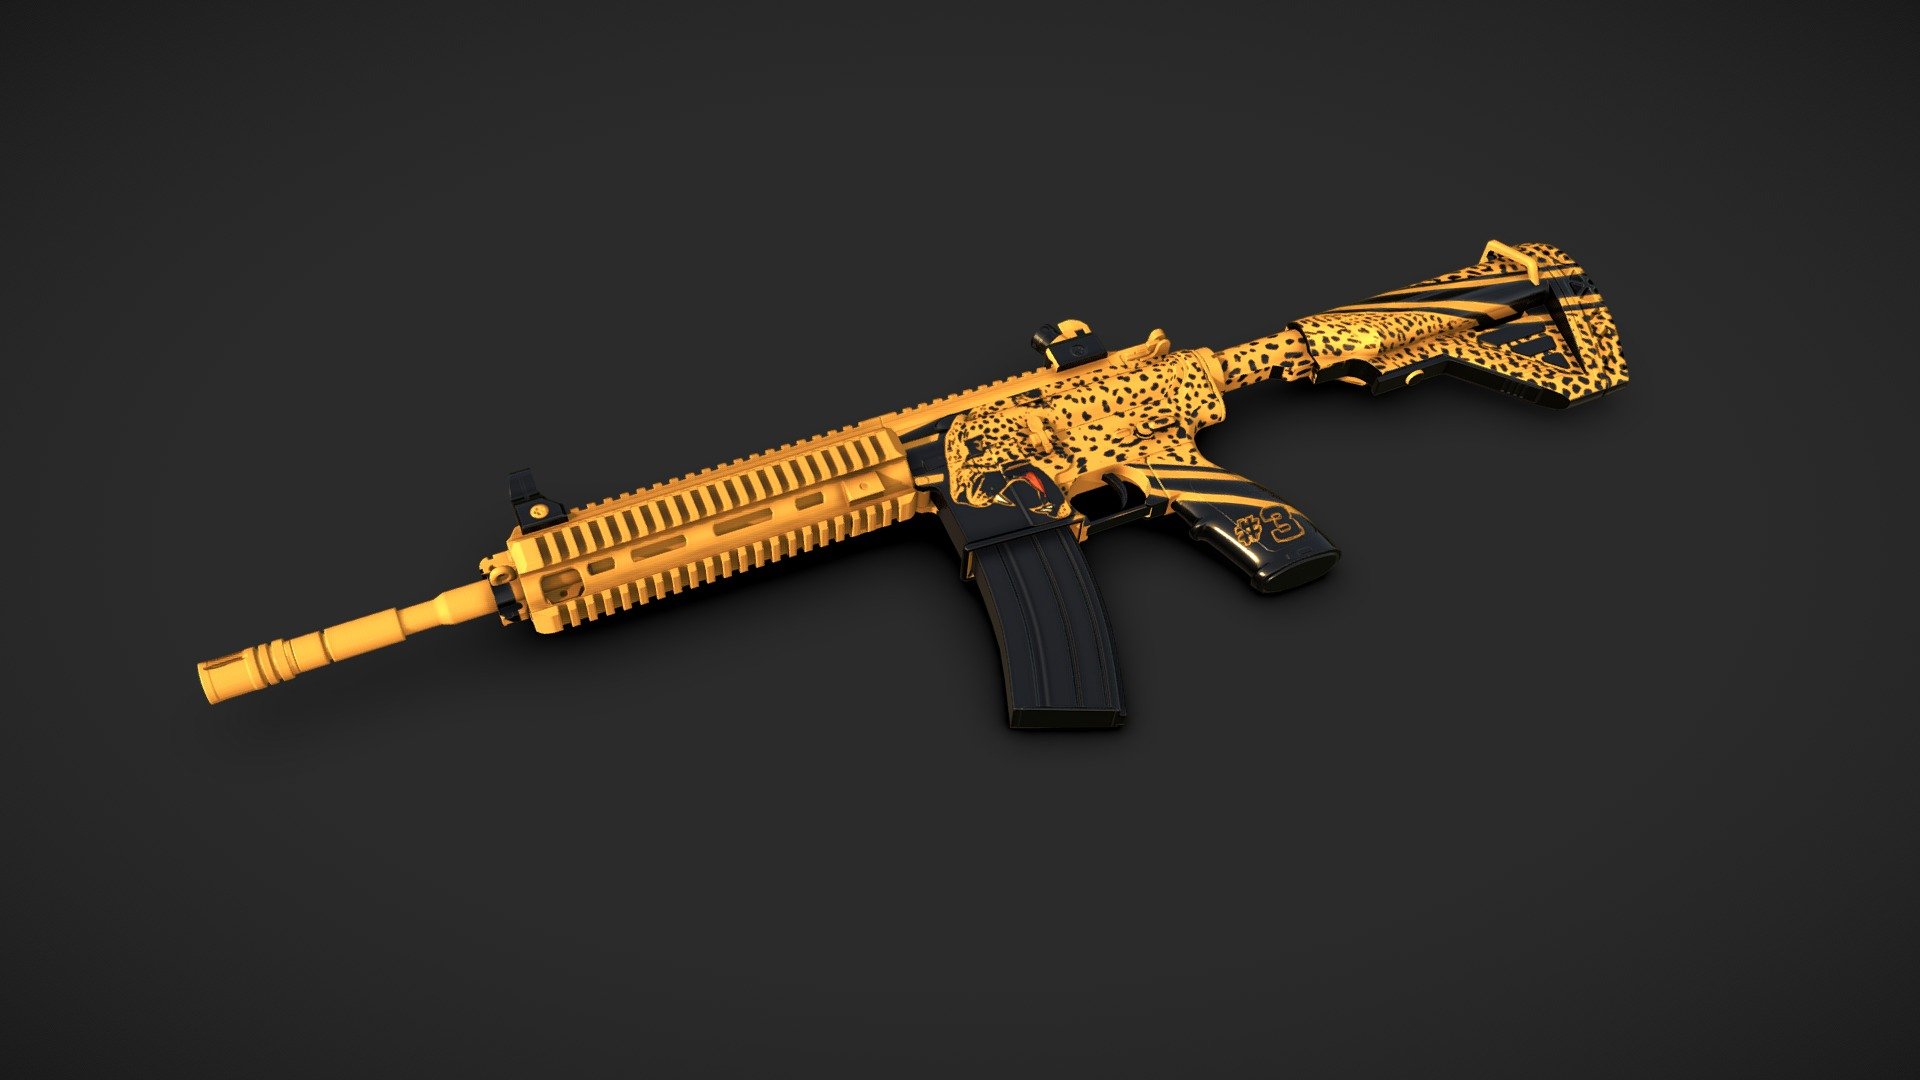 M416 Skin Concept Leopard Not Completed 3d Model By Jaune Padawan Cd9c133 Sketchfab